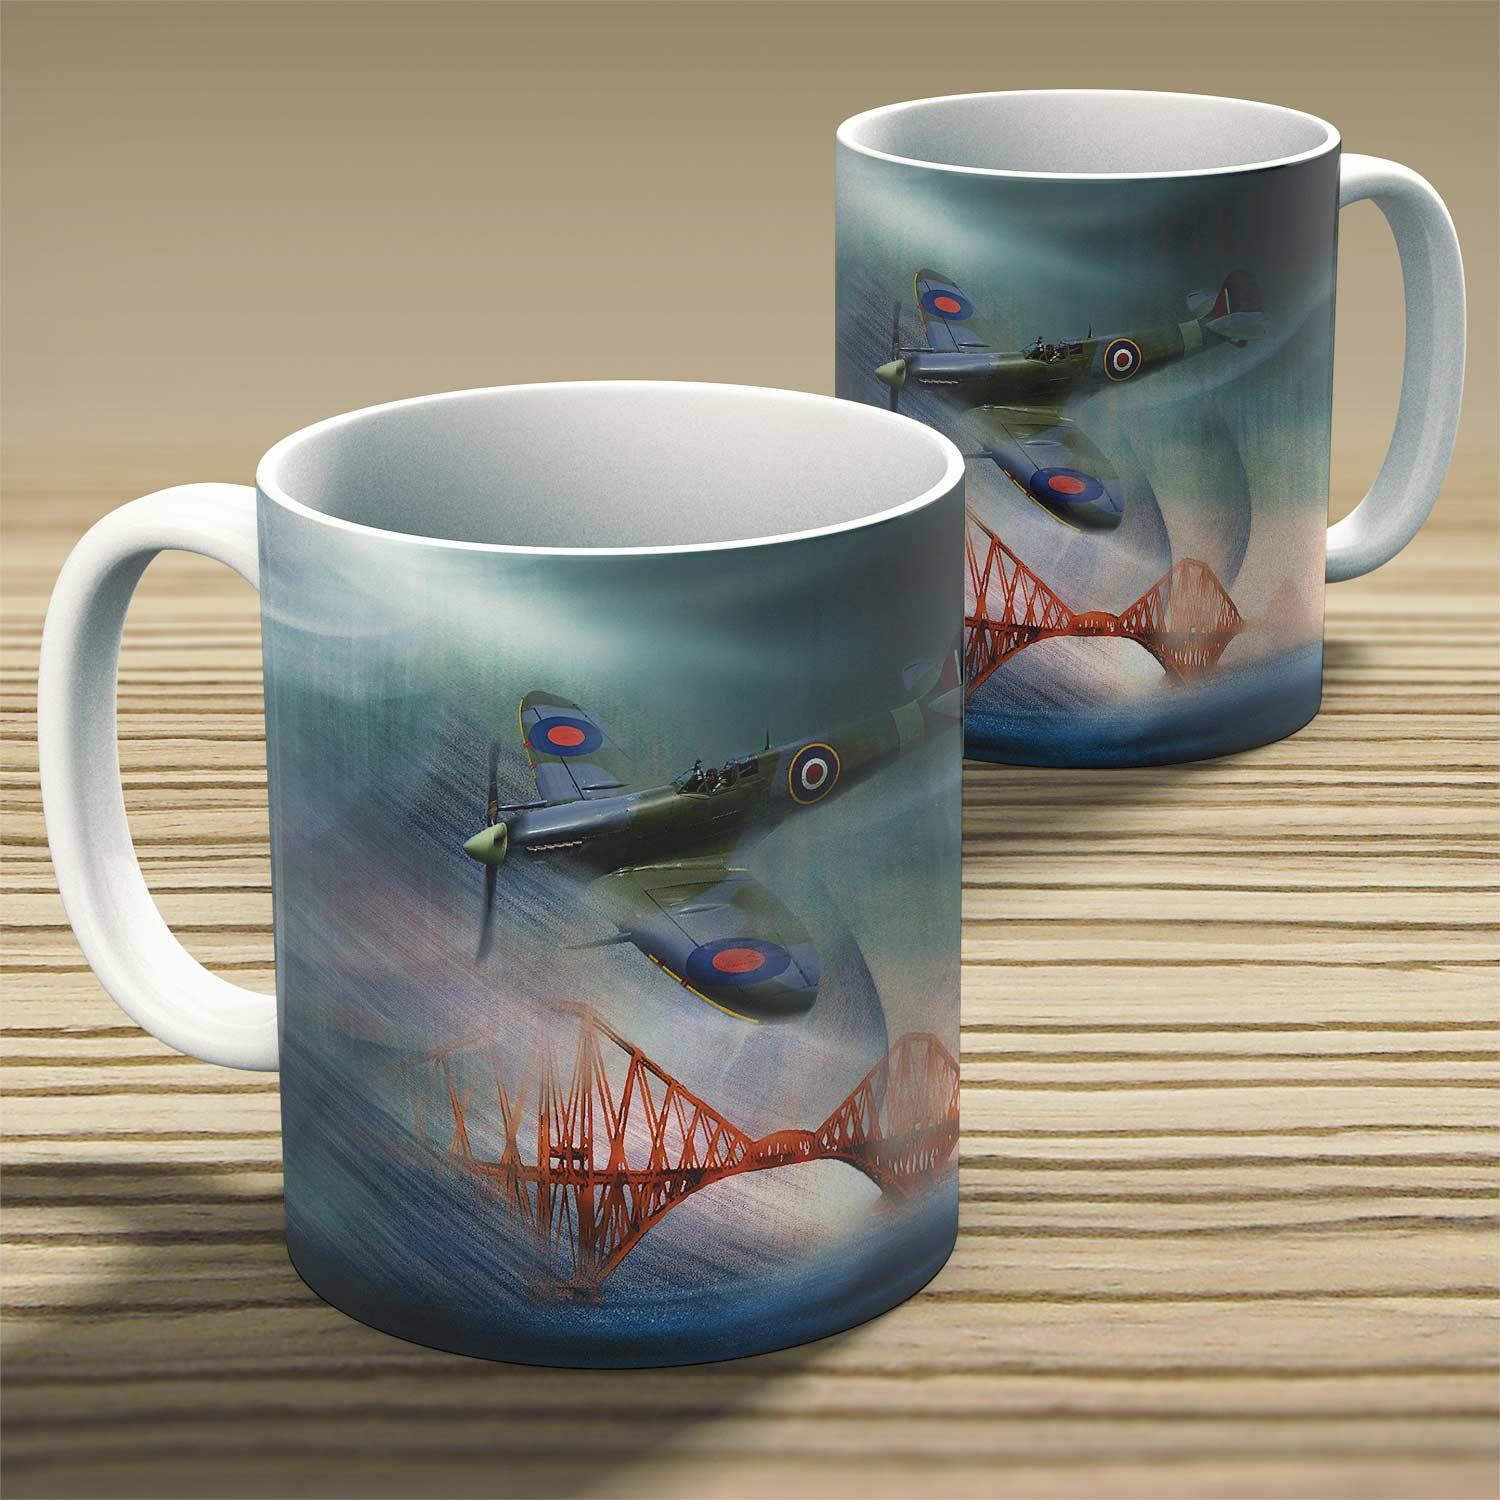 Spitfire Over Forth Bridge, Fife Mug from an original painting by artist Esther Cohen